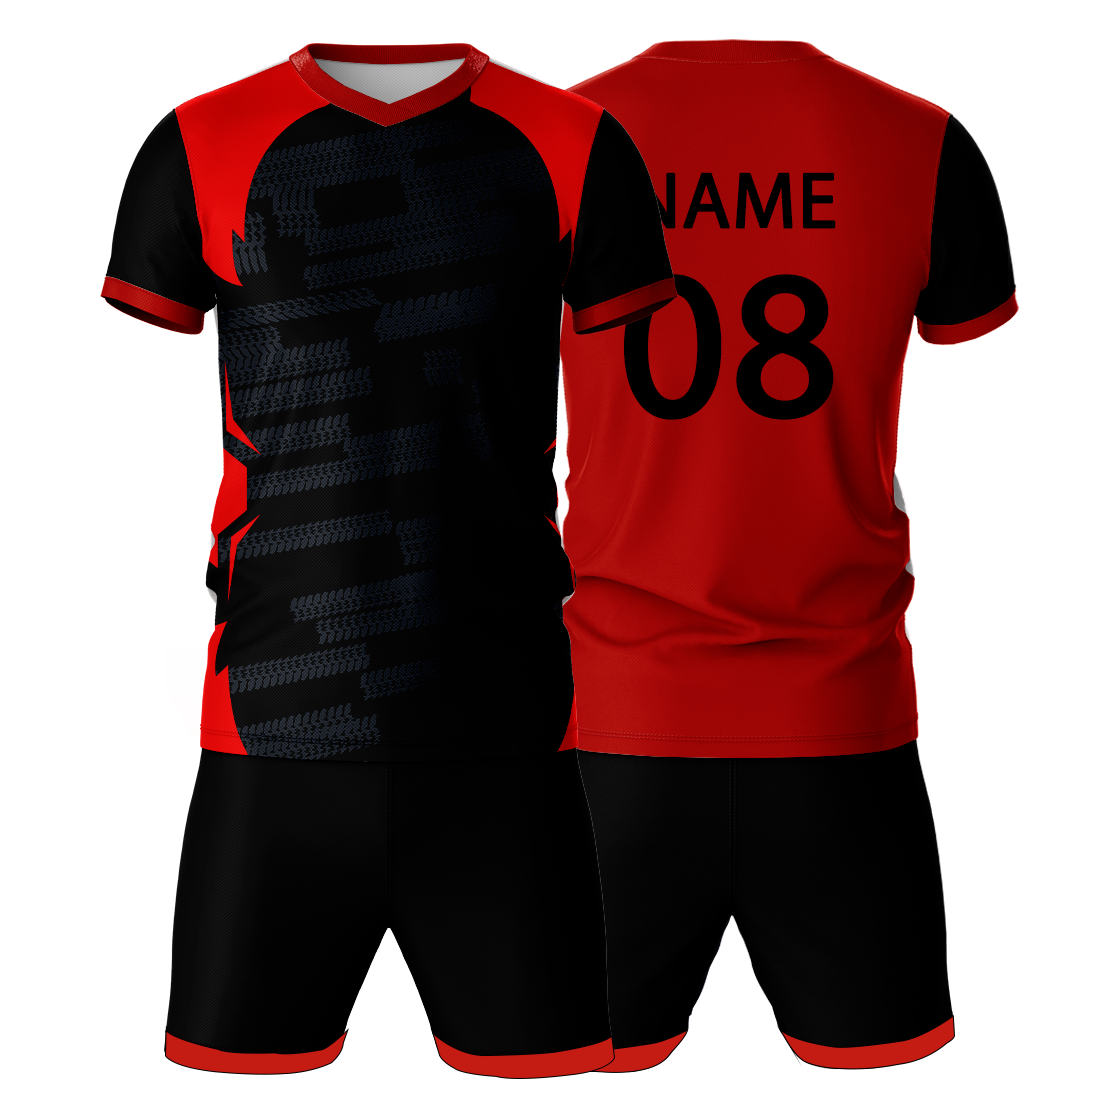 All Over Printed Jersey With Shorts Name & Number Printed.NP50000671